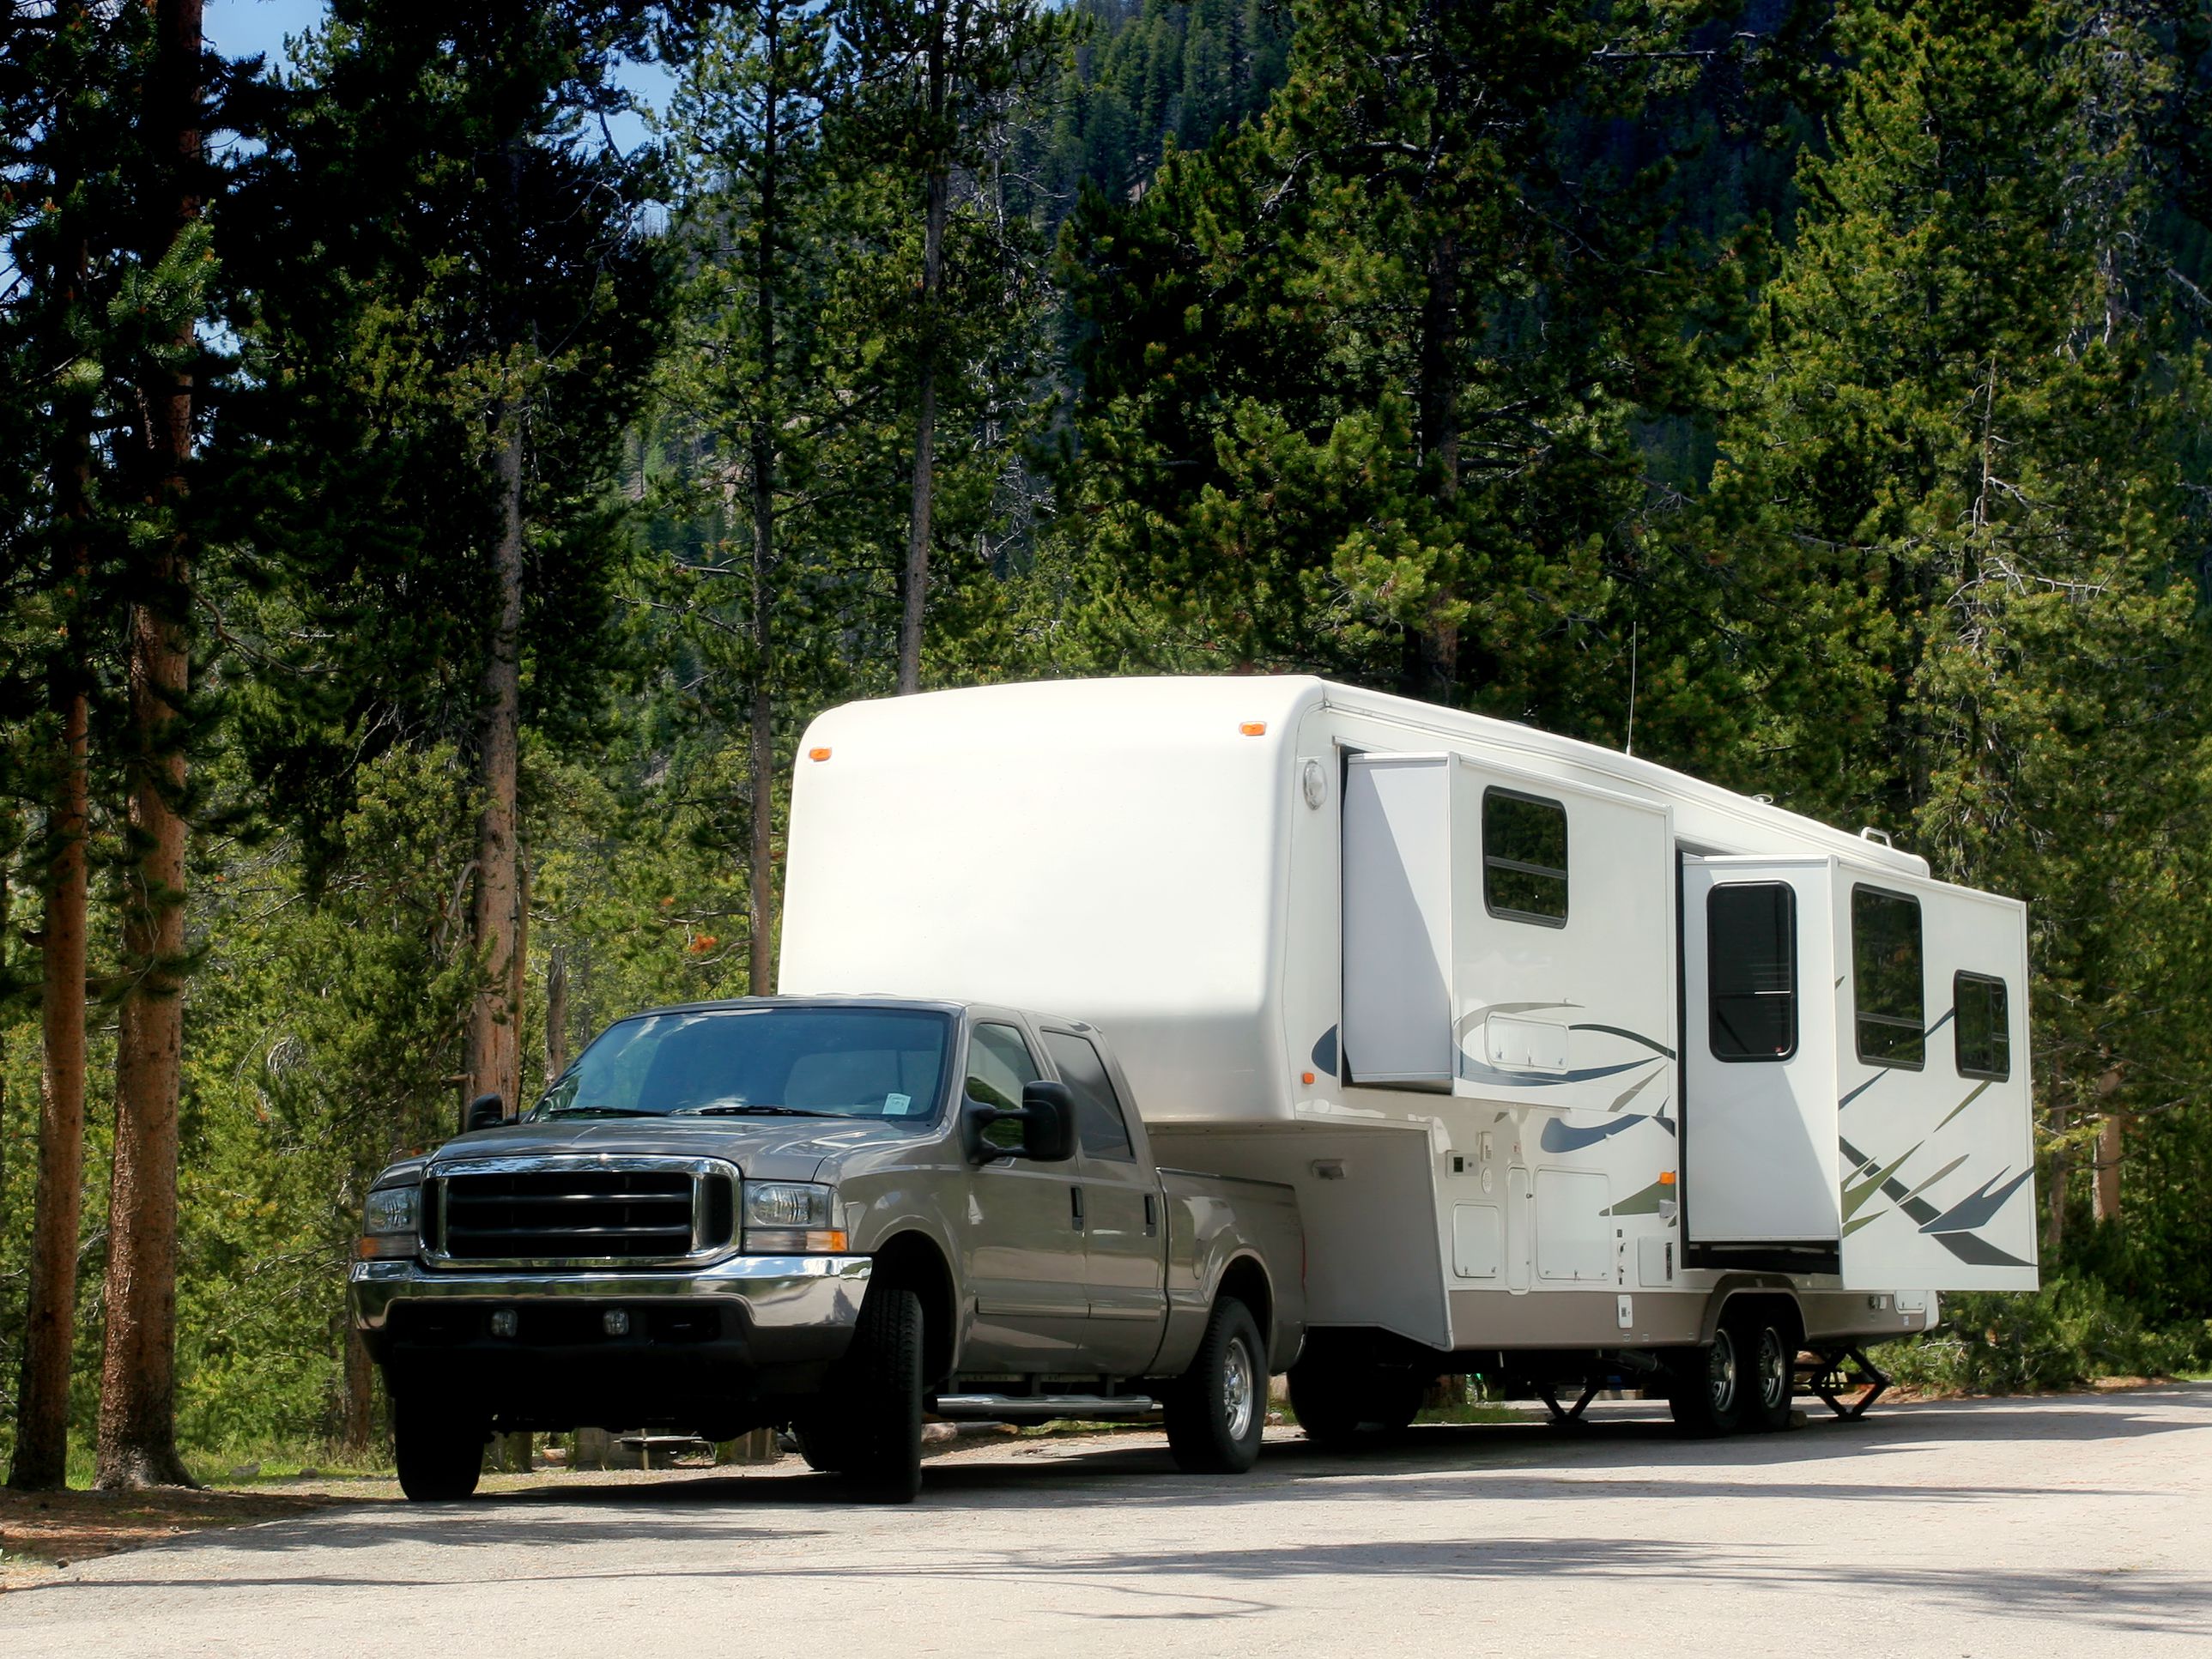 These trailers attach to a special “fifth-wheel” hitch in the bed of the big, powerful trucks that are required to pull them. The biggest trailers you can buy, they get their characteristic look from their raised, forward living/sleeping quarters.